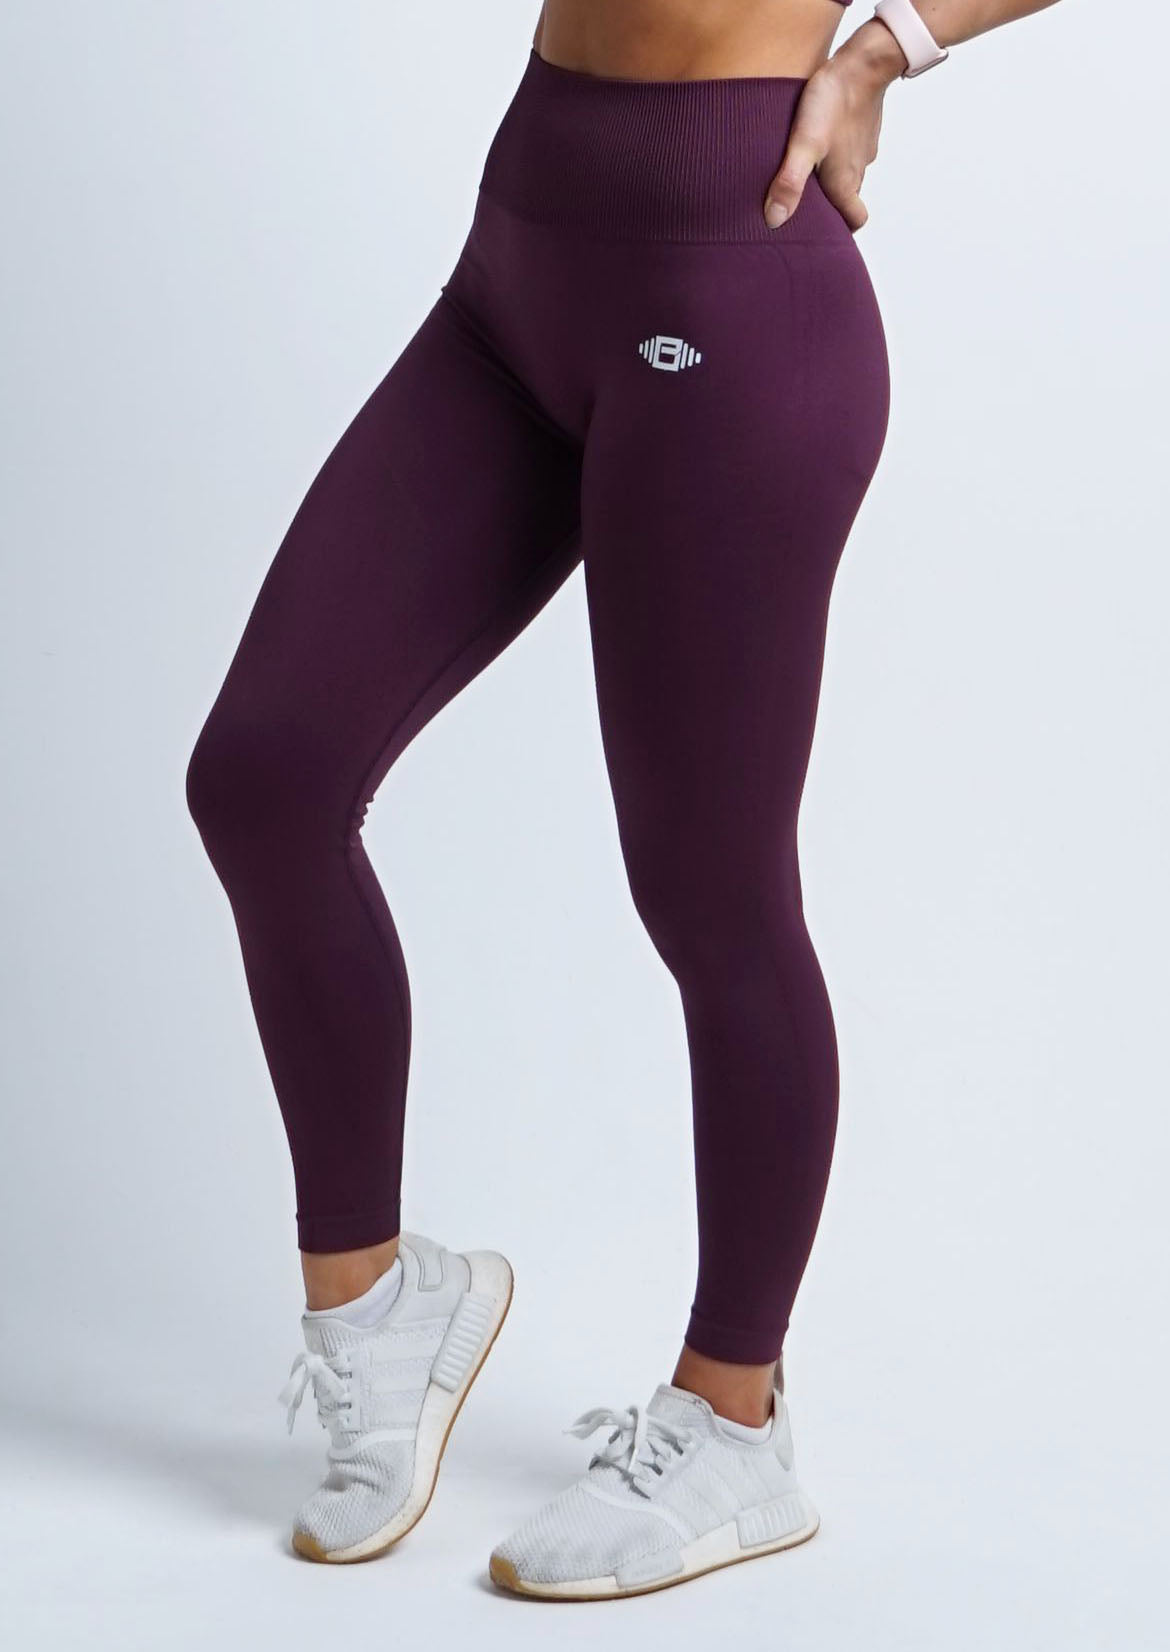 Anywhere Motion365+ Shine High-Waisted Legging - Fabletics Canada